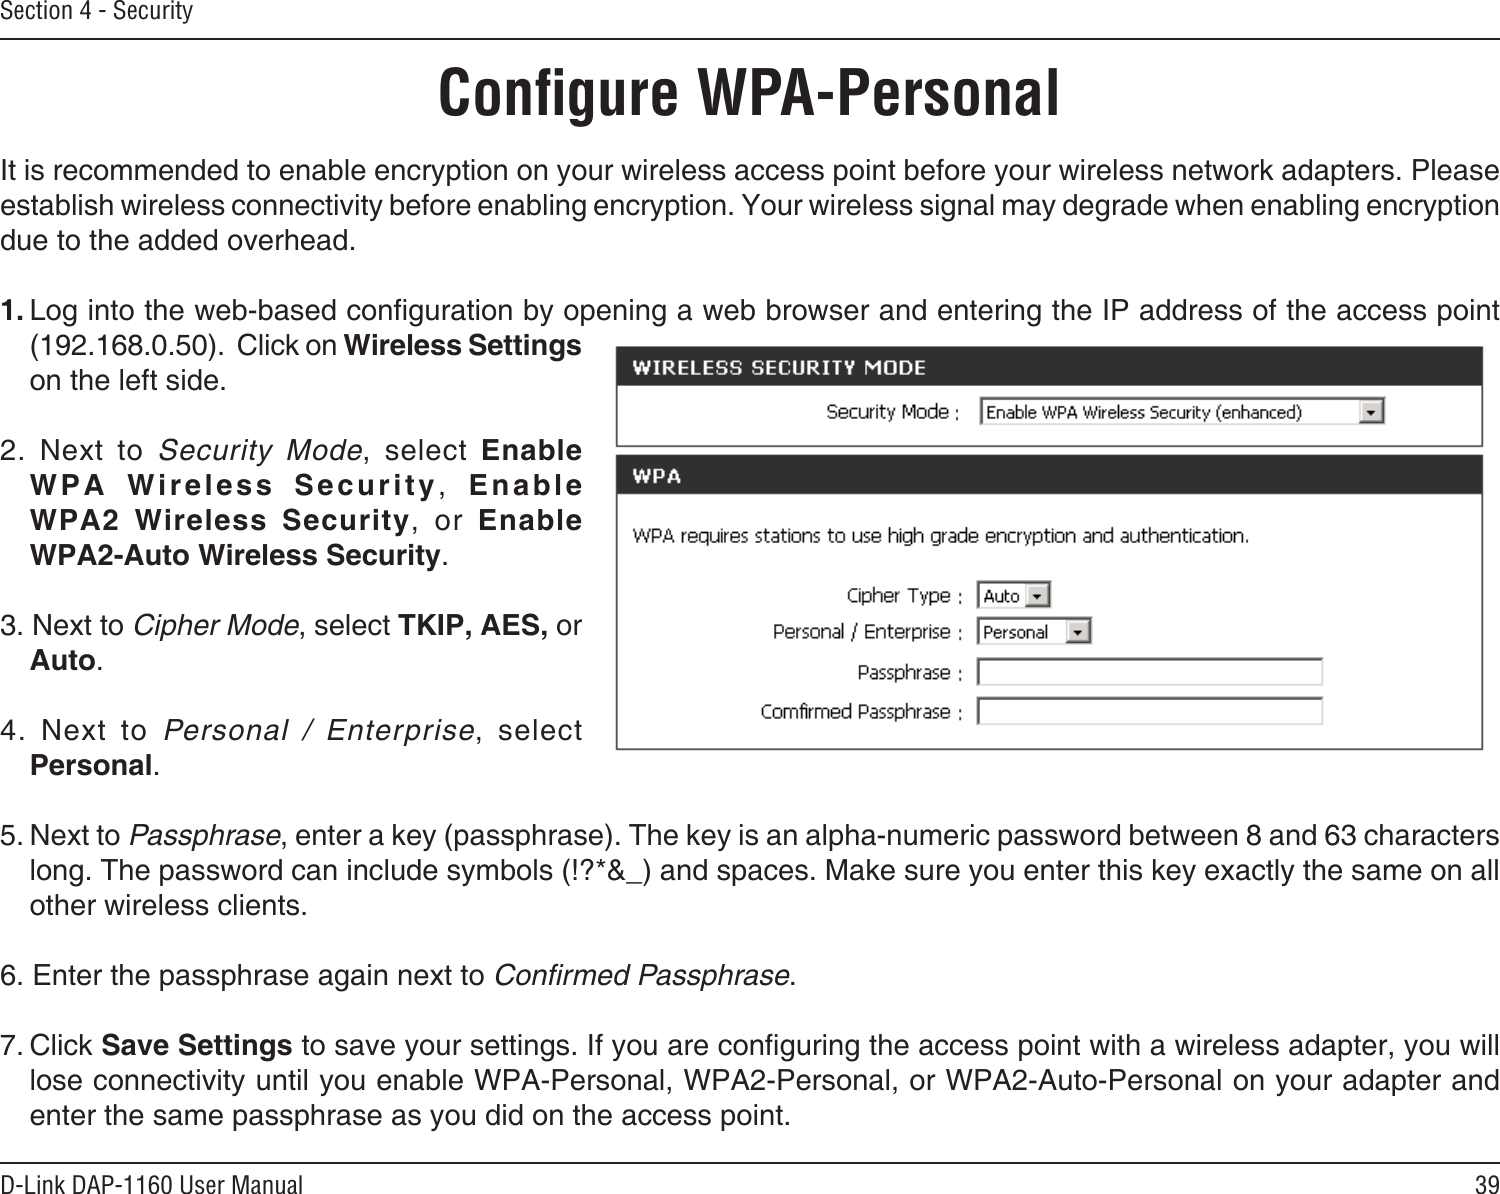 39D-Link DAP-1160 User ManualSection 4 - SecurityConﬁgure WPA-PersonalIt is recommended to enable encryption on your wireless access point before your wireless network adapters. Please establish wireless connectivity before enabling encryption. Your wireless signal may degrade when enabling encryption due to the added overhead.1. Log into the web-based conguration by opening a web browser and entering the IP address of the access point (192.168.0.50).  Click on Wireless Settings on the left side.2.  Next  to  Security  Mode,  select  Enable W P A   W i r e l e s s  S e c u r it y ,   Enable  WPA2  Wireless  Security,  or  Enable  WPA2-Auto Wireless Security.3. Next to Cipher Mode, select TKIP, AES, or Auto.4.  Next  to  Personal  /  Enterprise,  select Personal.5. Next to Passphrase, enter a key (passphrase). The key is an alpha-numeric password between 8 and 63 characters long. The password can include symbols (!?*&amp;_) and spaces. Make sure you enter this key exactly the same on all other wireless clients.6. Enter the passphrase again next to Conﬁrmed Passphrase.7. Click Save Settings to save your settings. If you are conguring the access point with a wireless adapter, you will lose connectivity until you enable WPA-Personal, WPA2-Personal, or WPA2-Auto-Personal on your adapter and enter the same passphrase as you did on the access point.